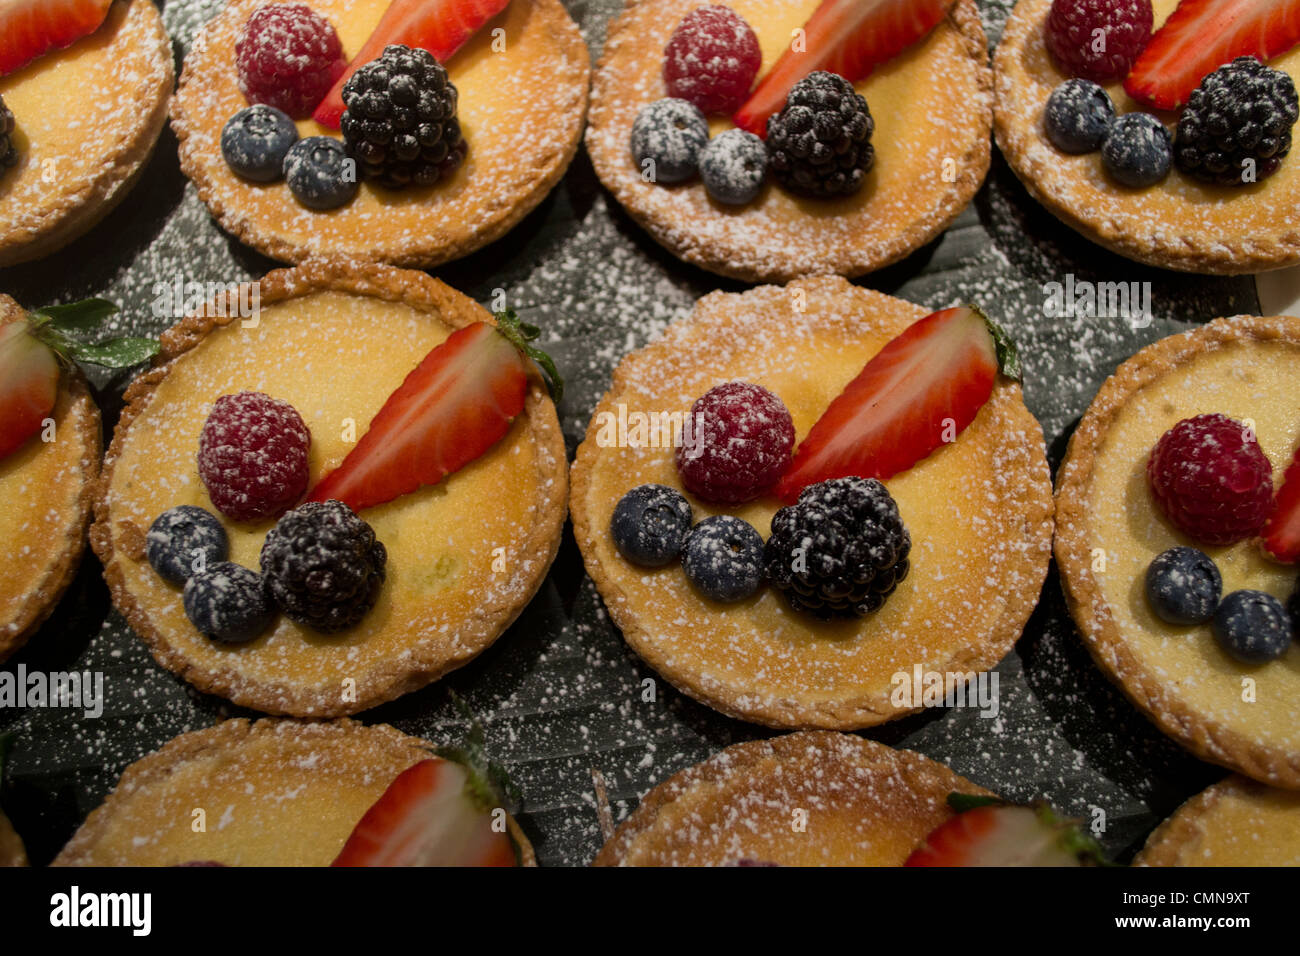 A plate of freshly-made fruit tarts Stock Photo